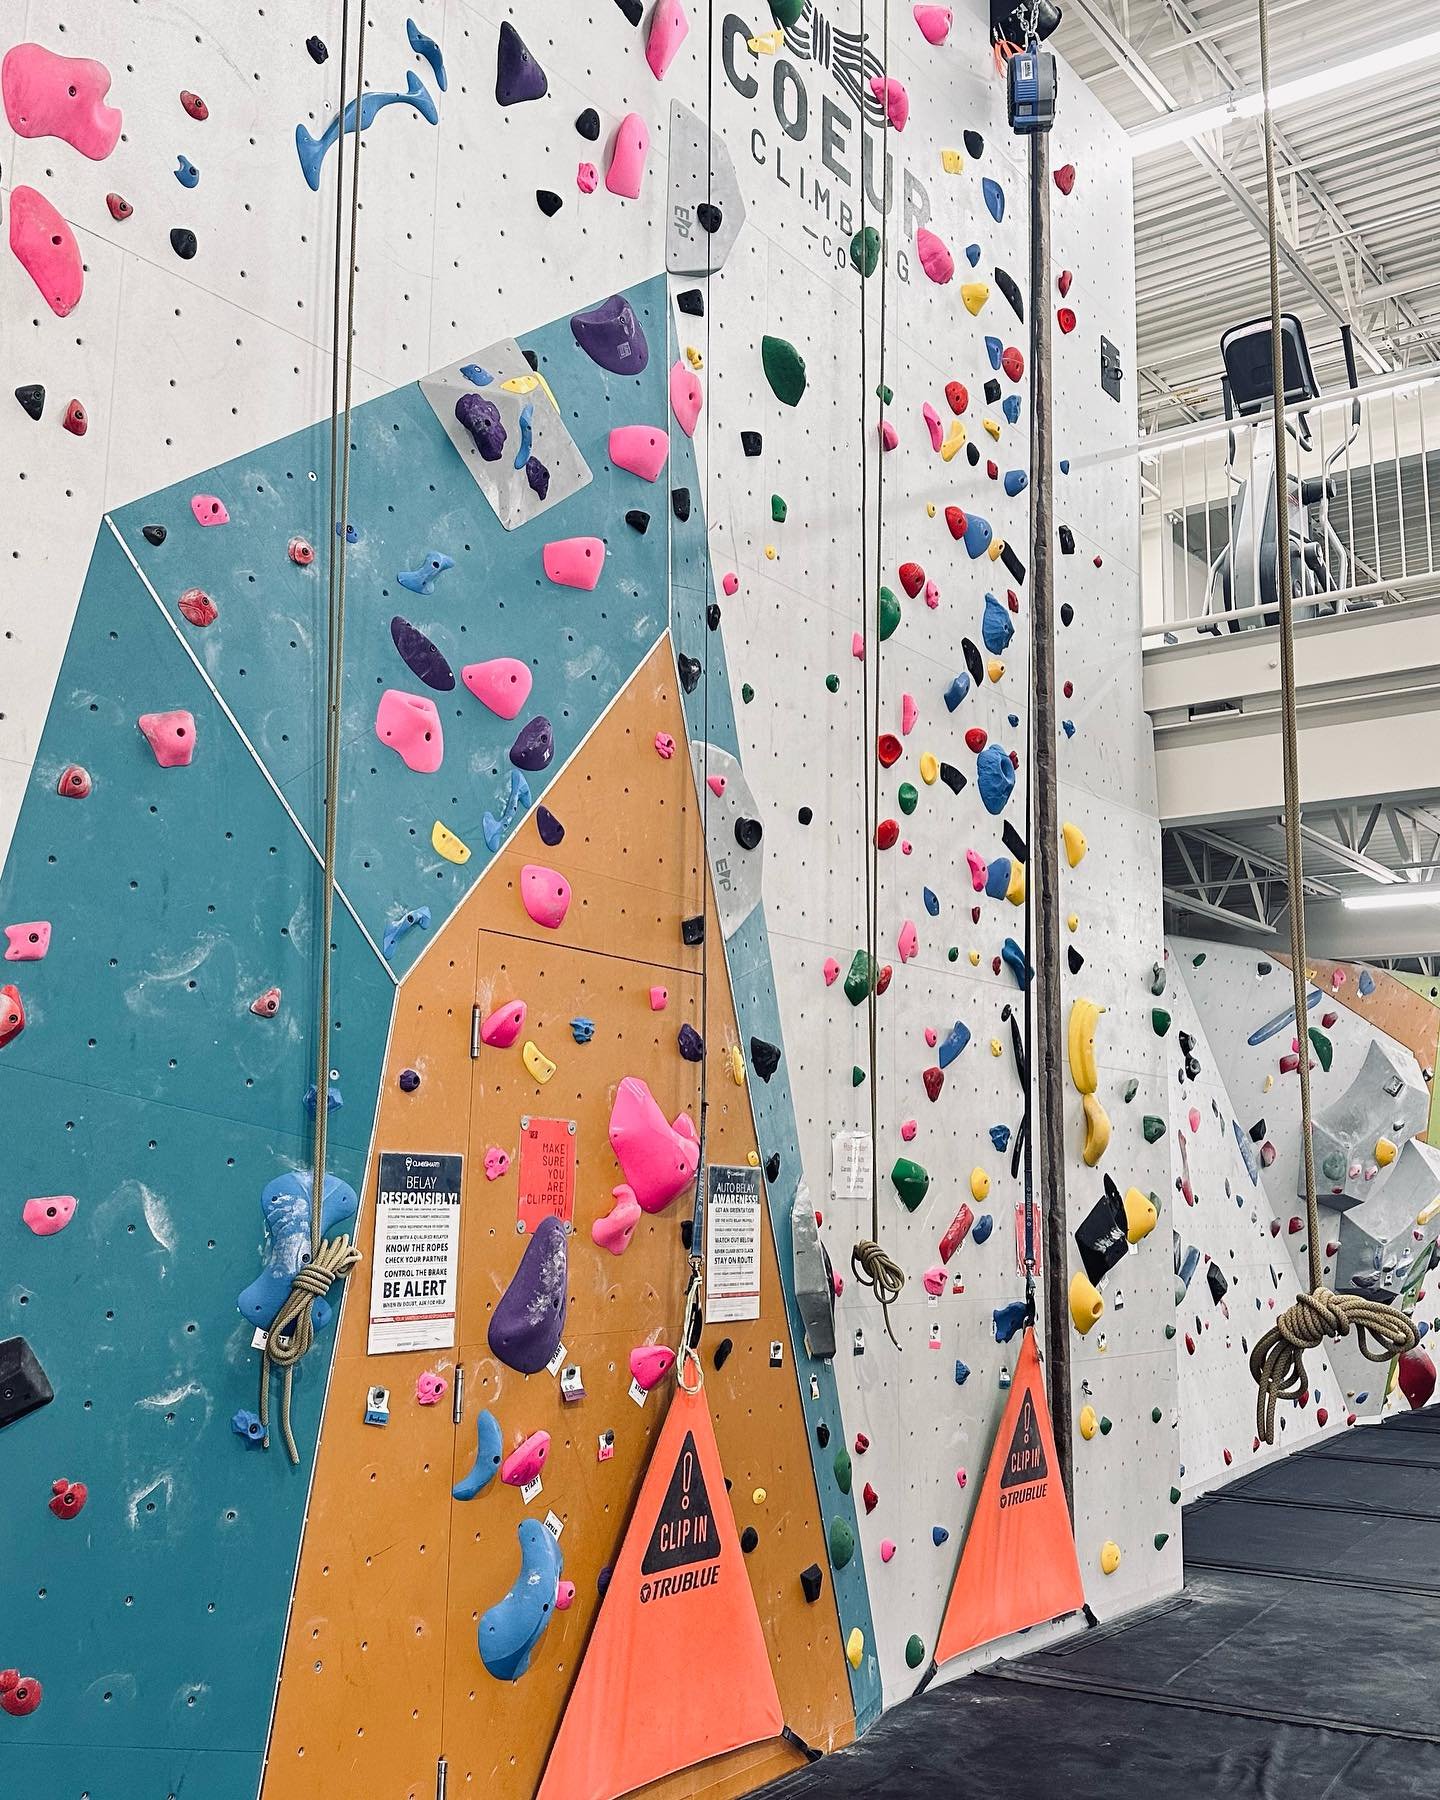 We have new climbs on the left roped wall, and new comp wall! This comp wall set is full of dyno fun!